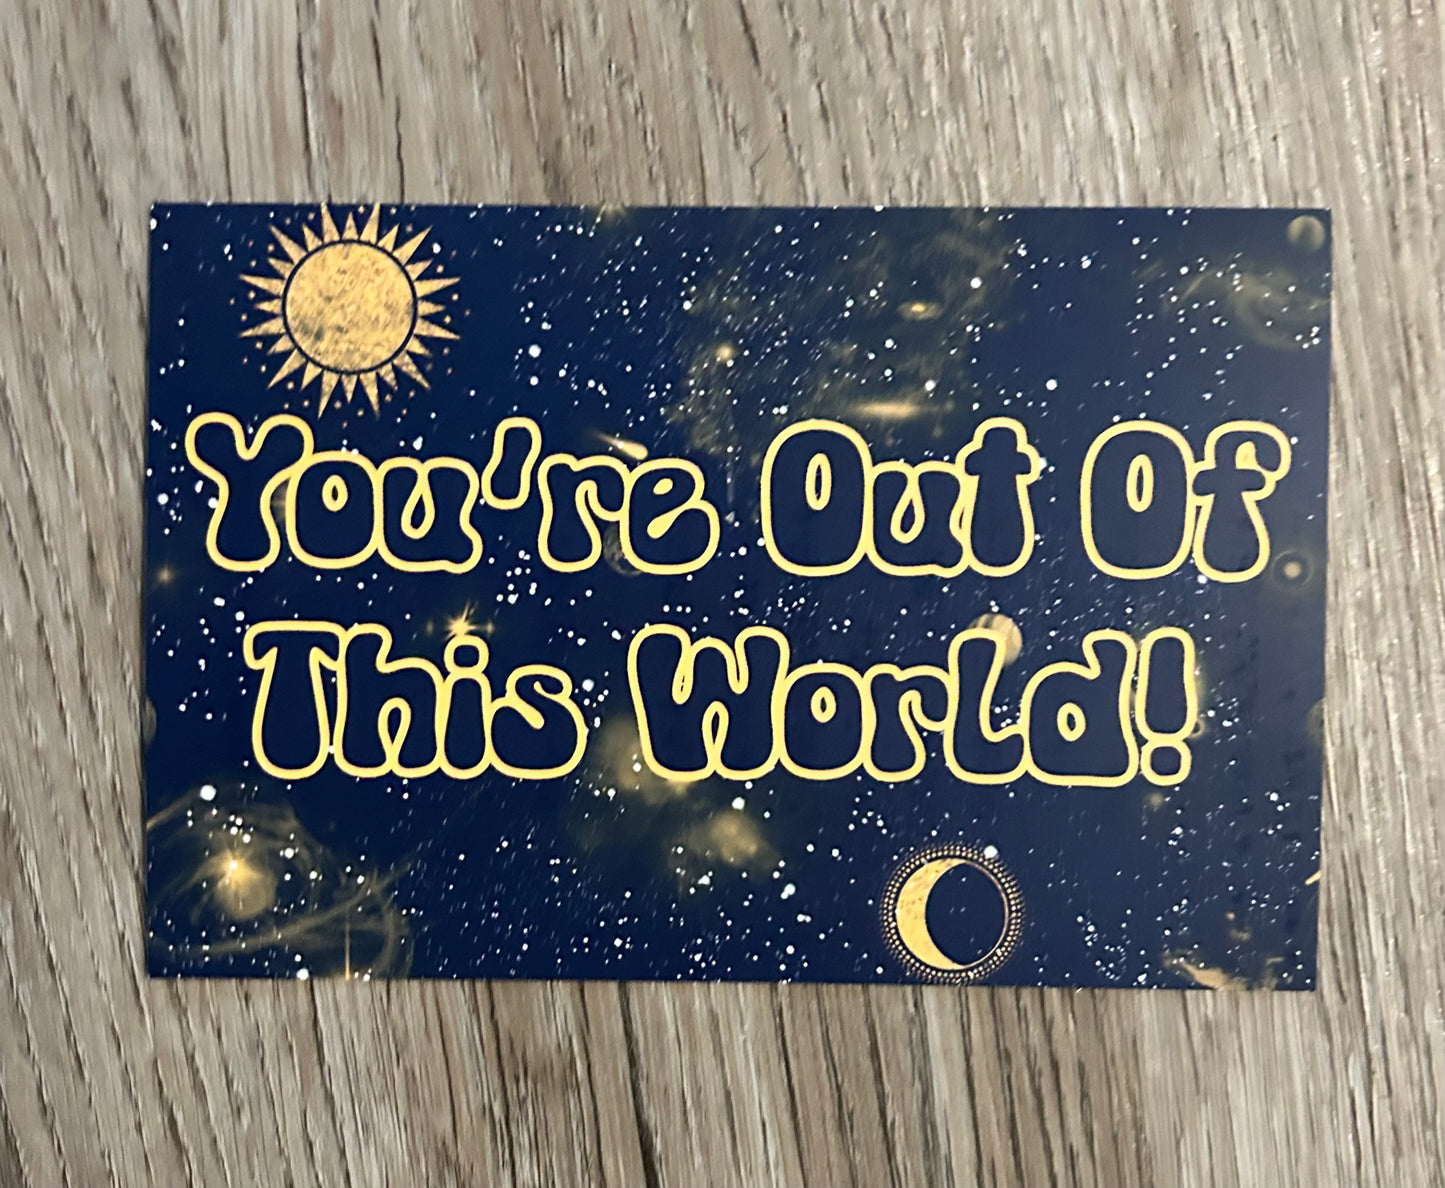 You're Out Of This World Thank You Cards